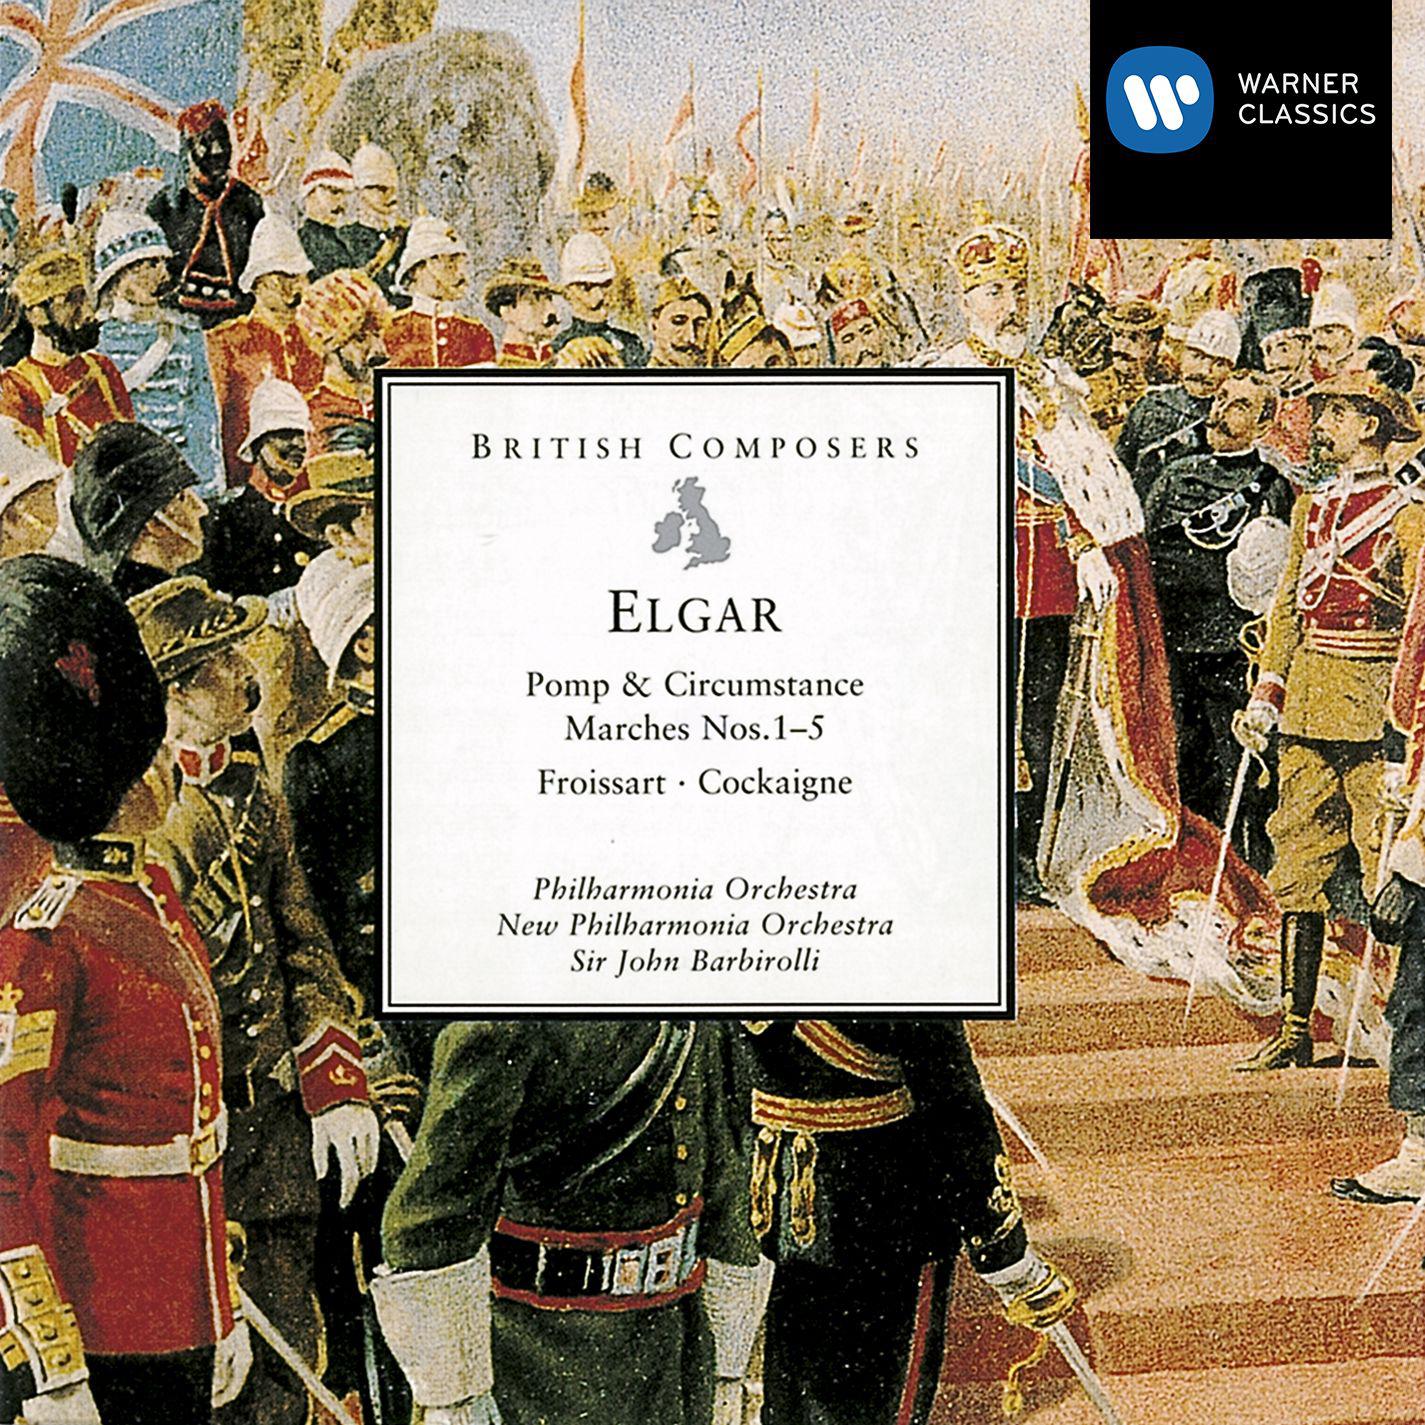 Pomp and Circumstance, Op. 39: No. 1, March in D Major